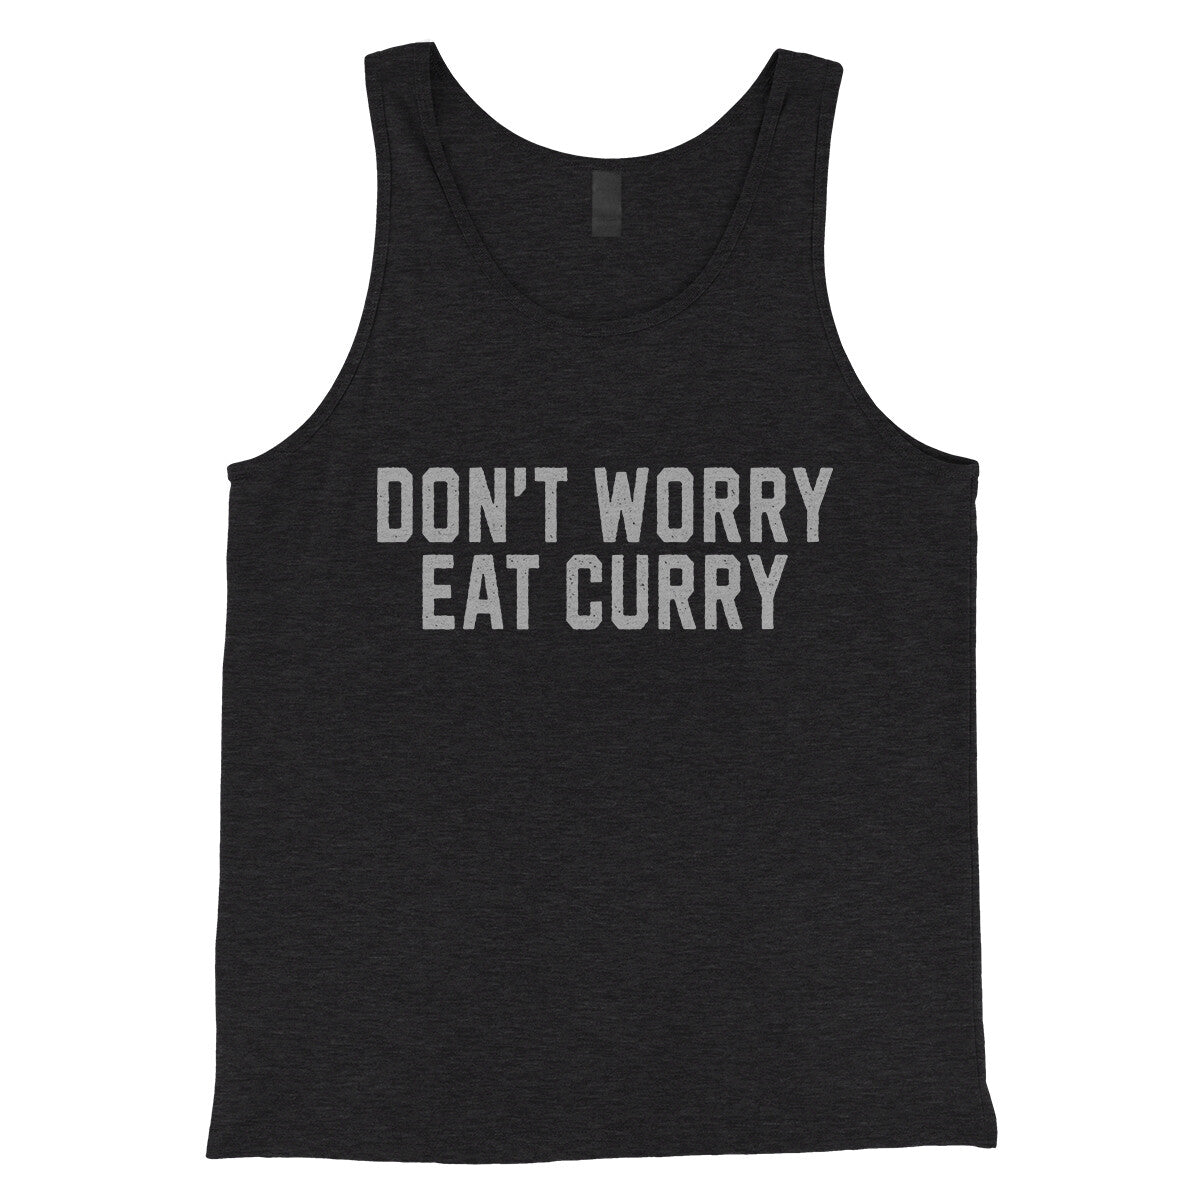 Don't Worry Eat Curry in Charcoal Black TriBlend Color